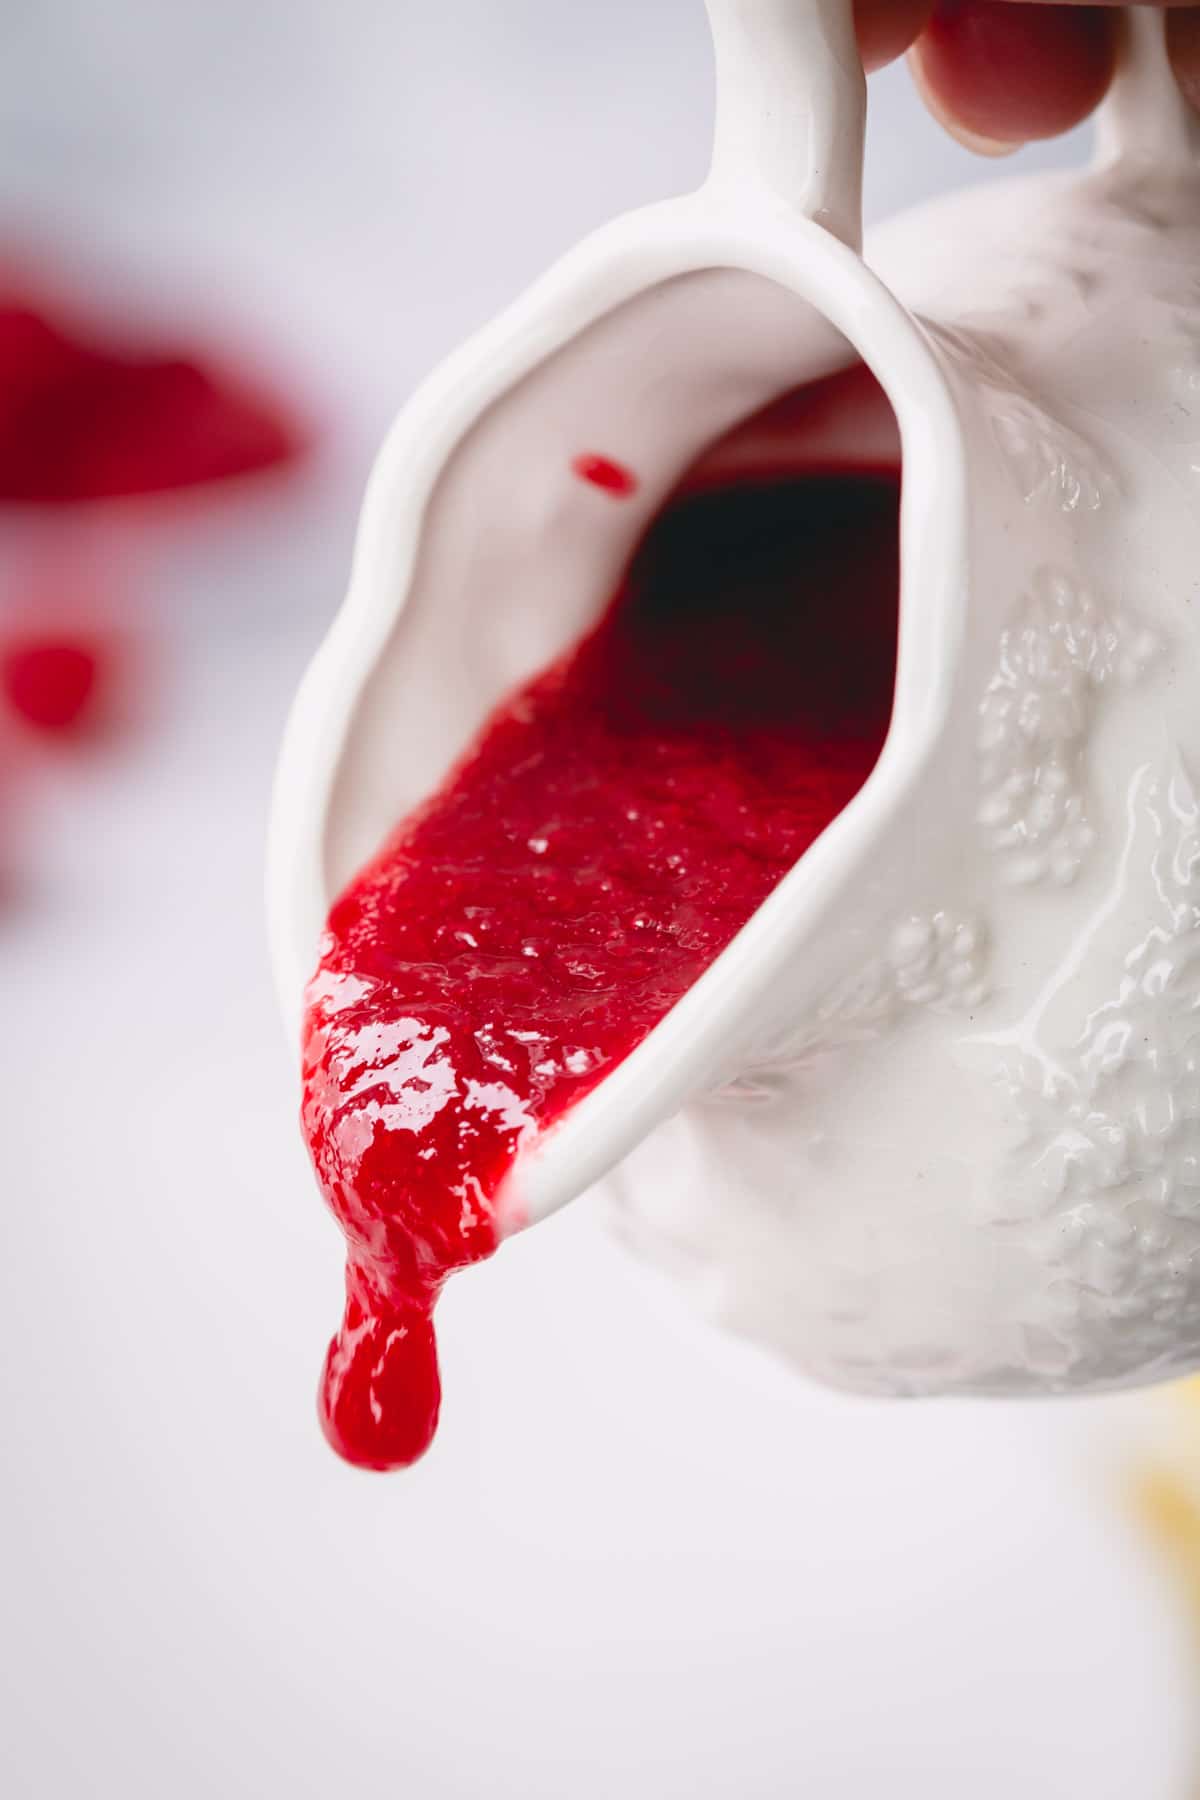 Raspberry sauce is being poured from a white sauce pitcher.